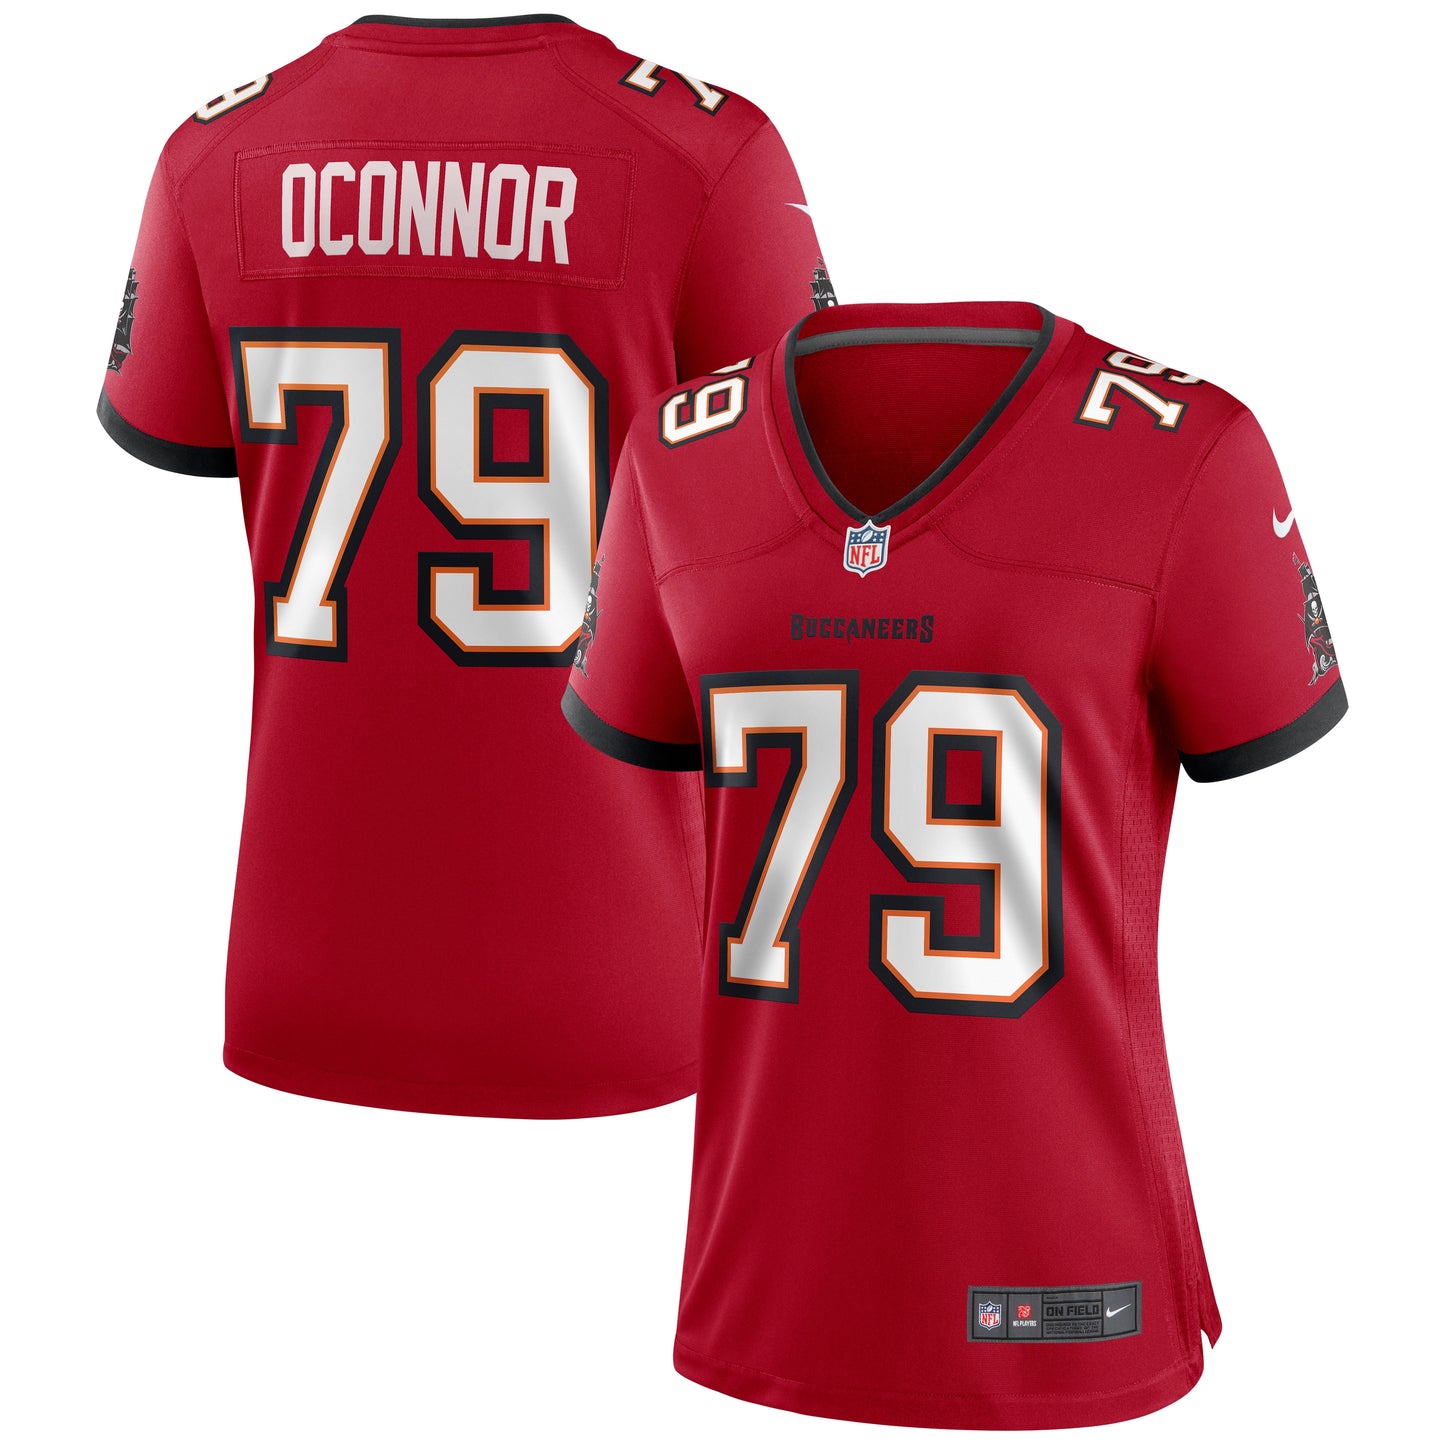 Patrick O'Connor Tampa Bay Buccaneers Nike Women's Game Jersey - Red